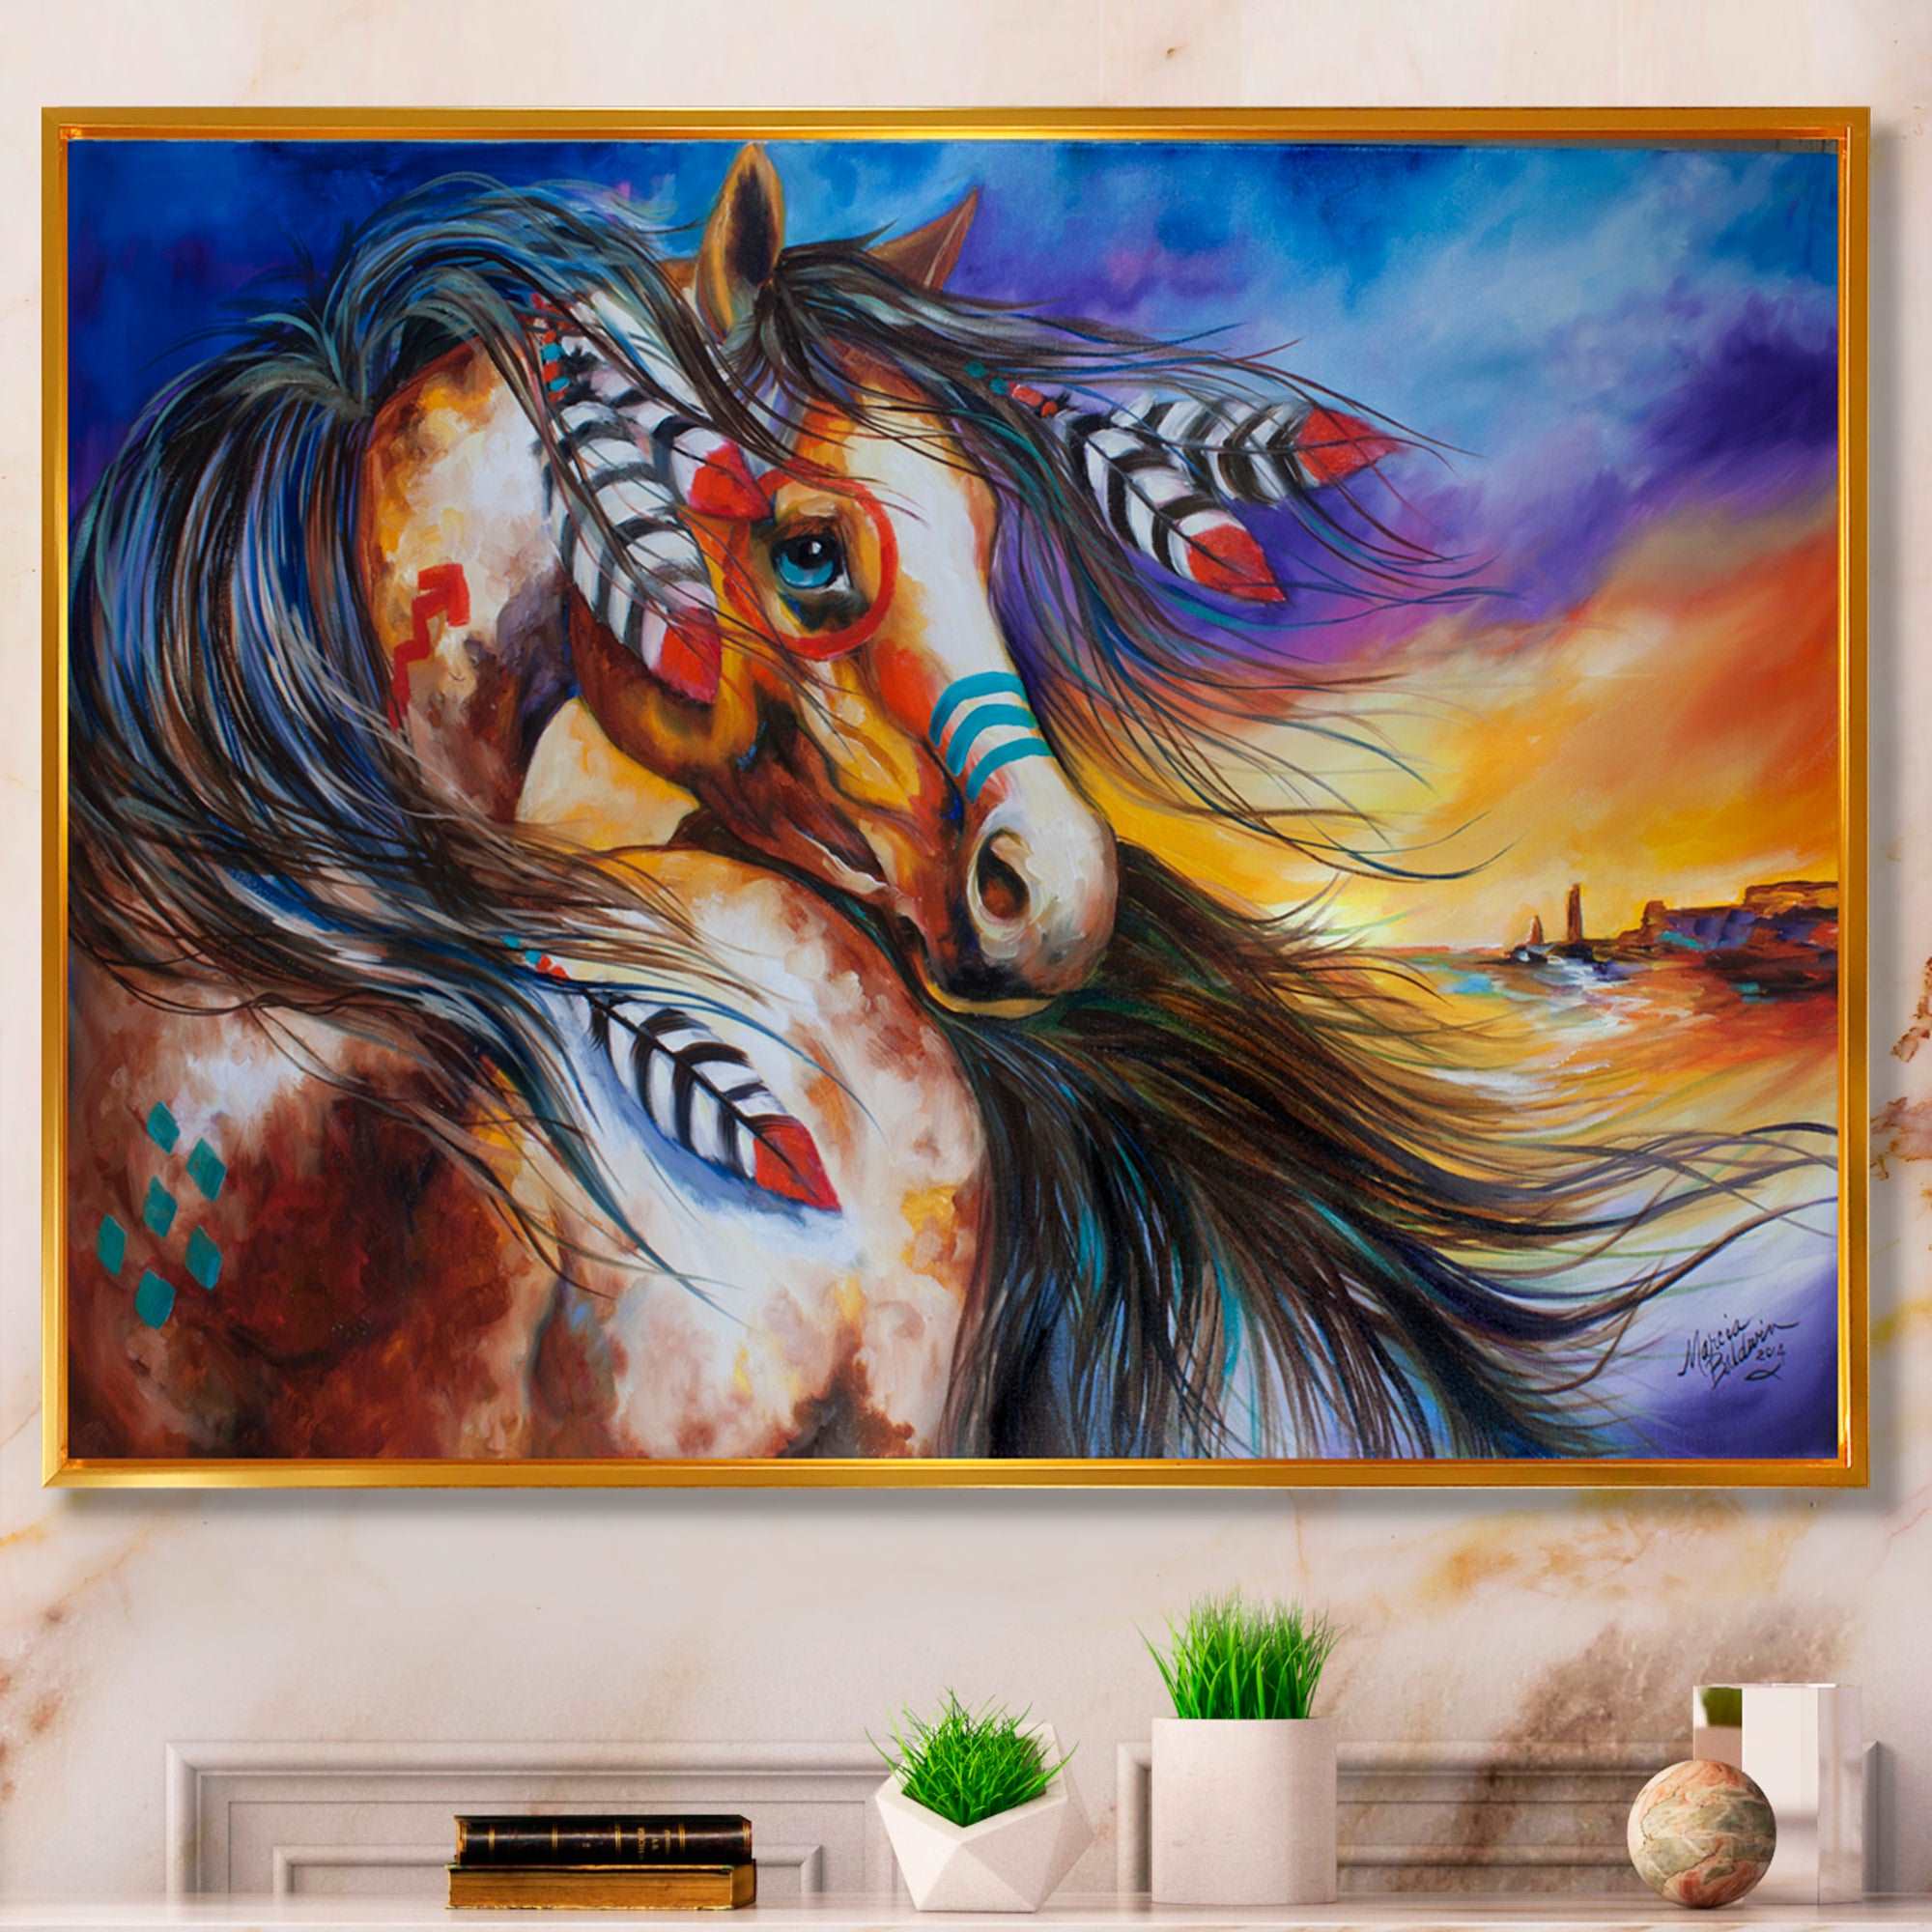 5 Feathers Indian War Horse Framed Canvas Vibrant Gold - 1.5" Thick